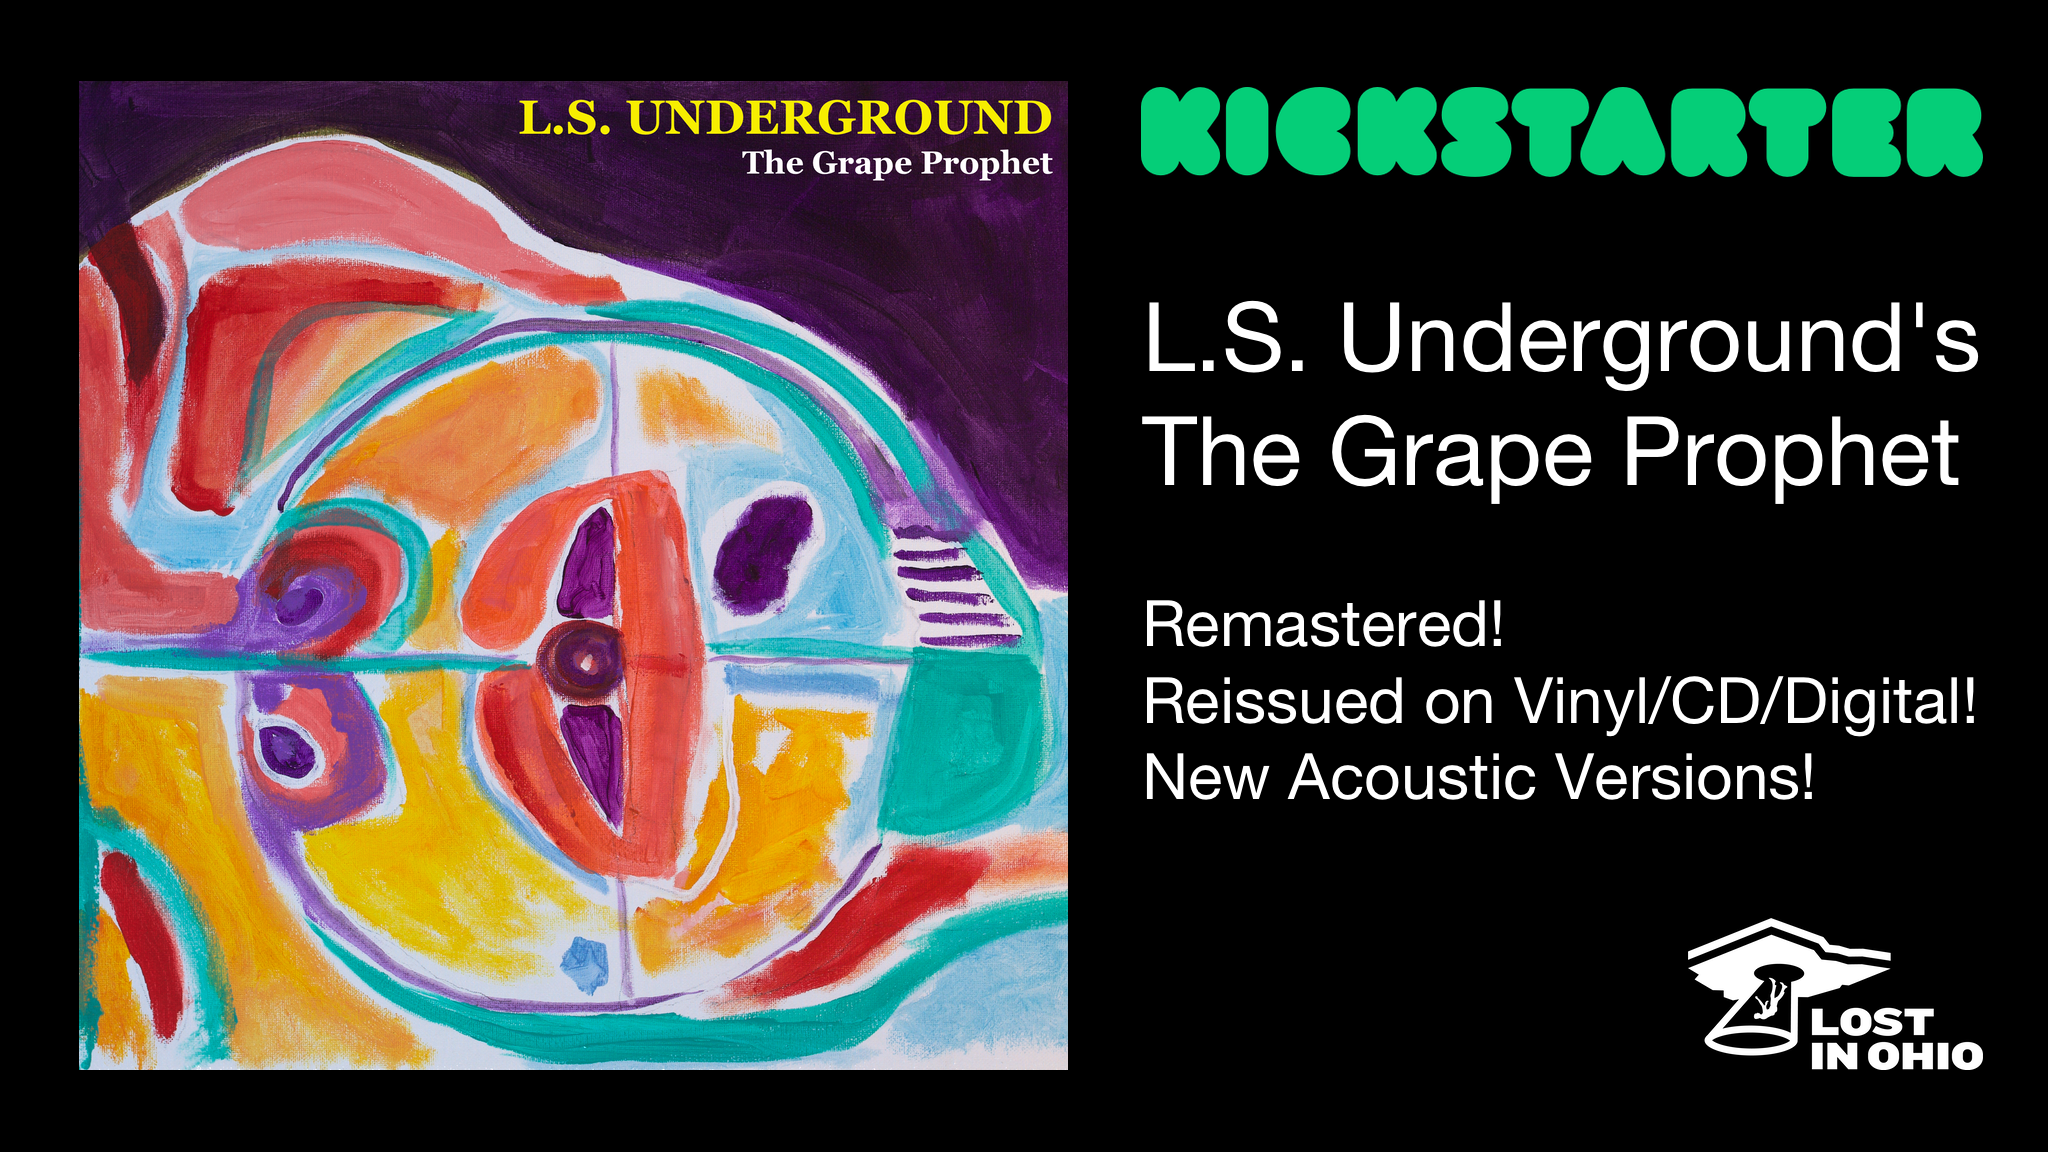 L.S. Underground’s “Grape Prophet”, remastered, reissued, expanded!